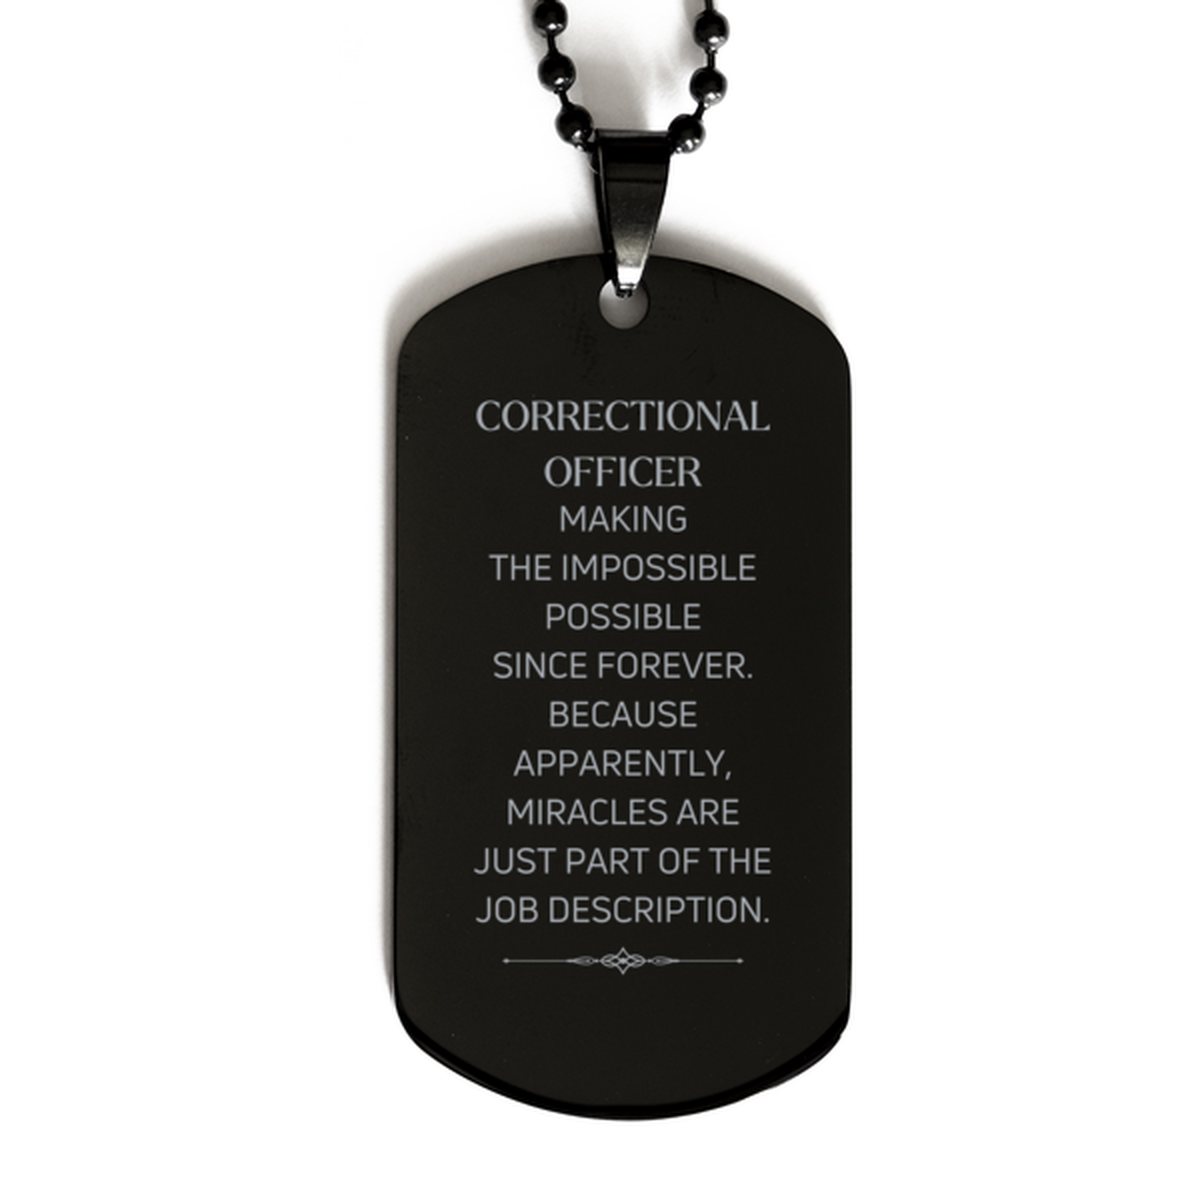 Funny Correctional Officer Gifts, Miracles are just part of the job description, Inspirational Birthday Black Dog Tag For Correctional Officer, Men, Women, Coworkers, Friends, Boss